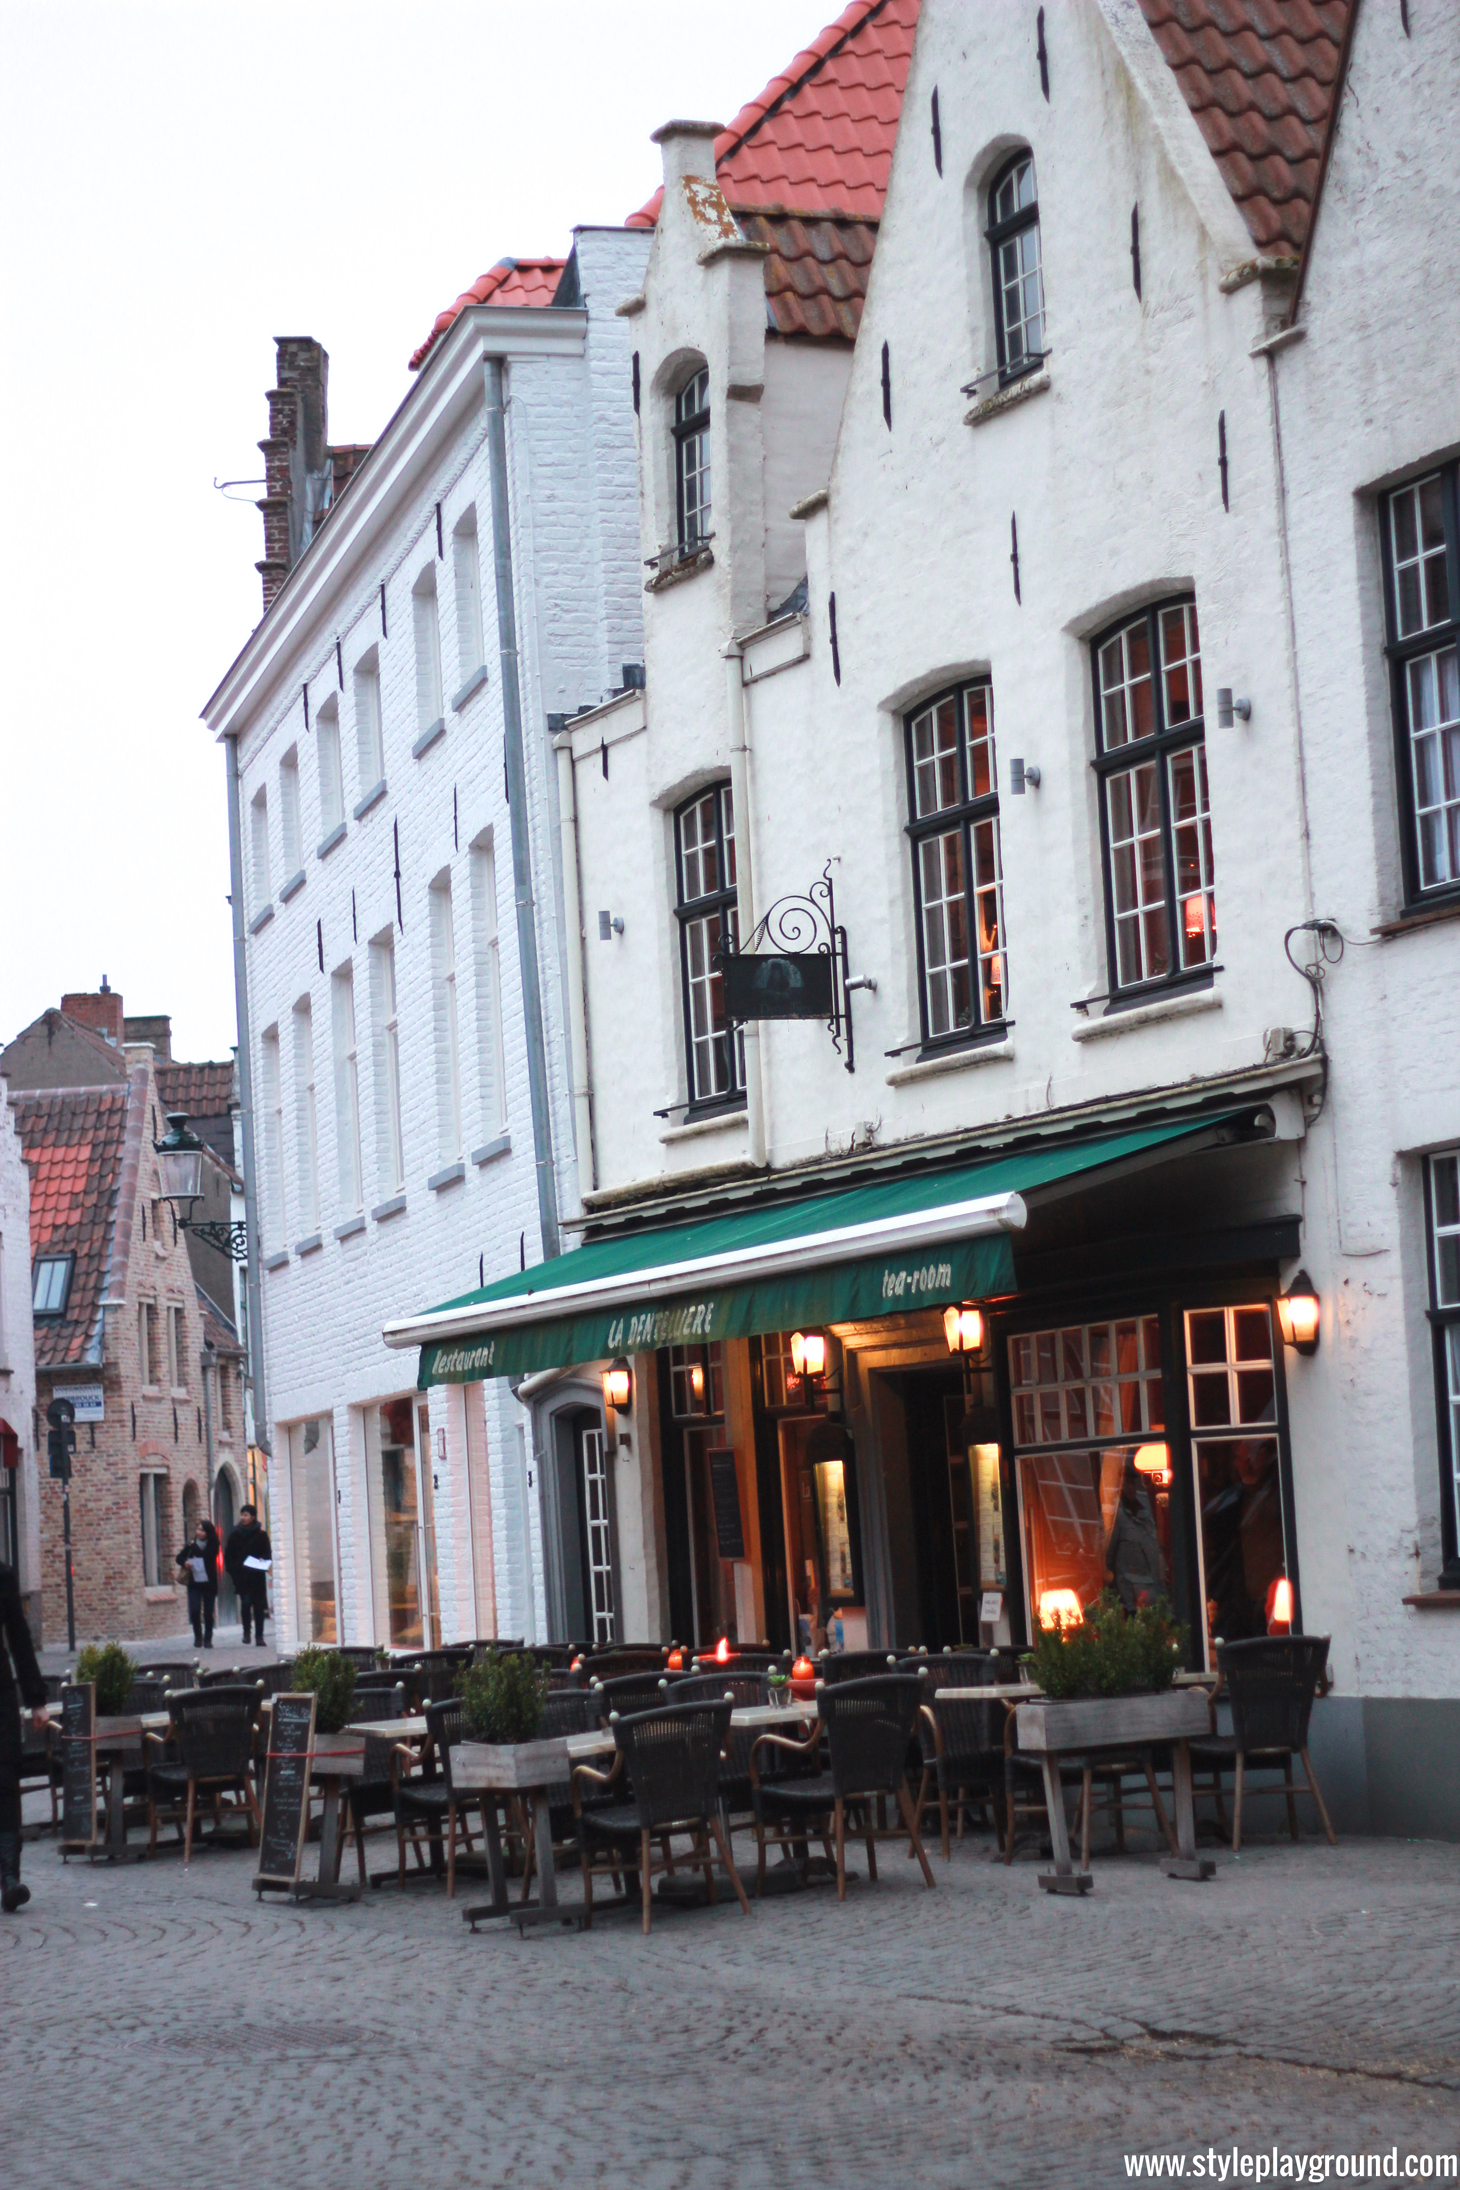 Axelle Blanpain of Style playground shares photos & tips from her weekend trip to Bruges, Belgium